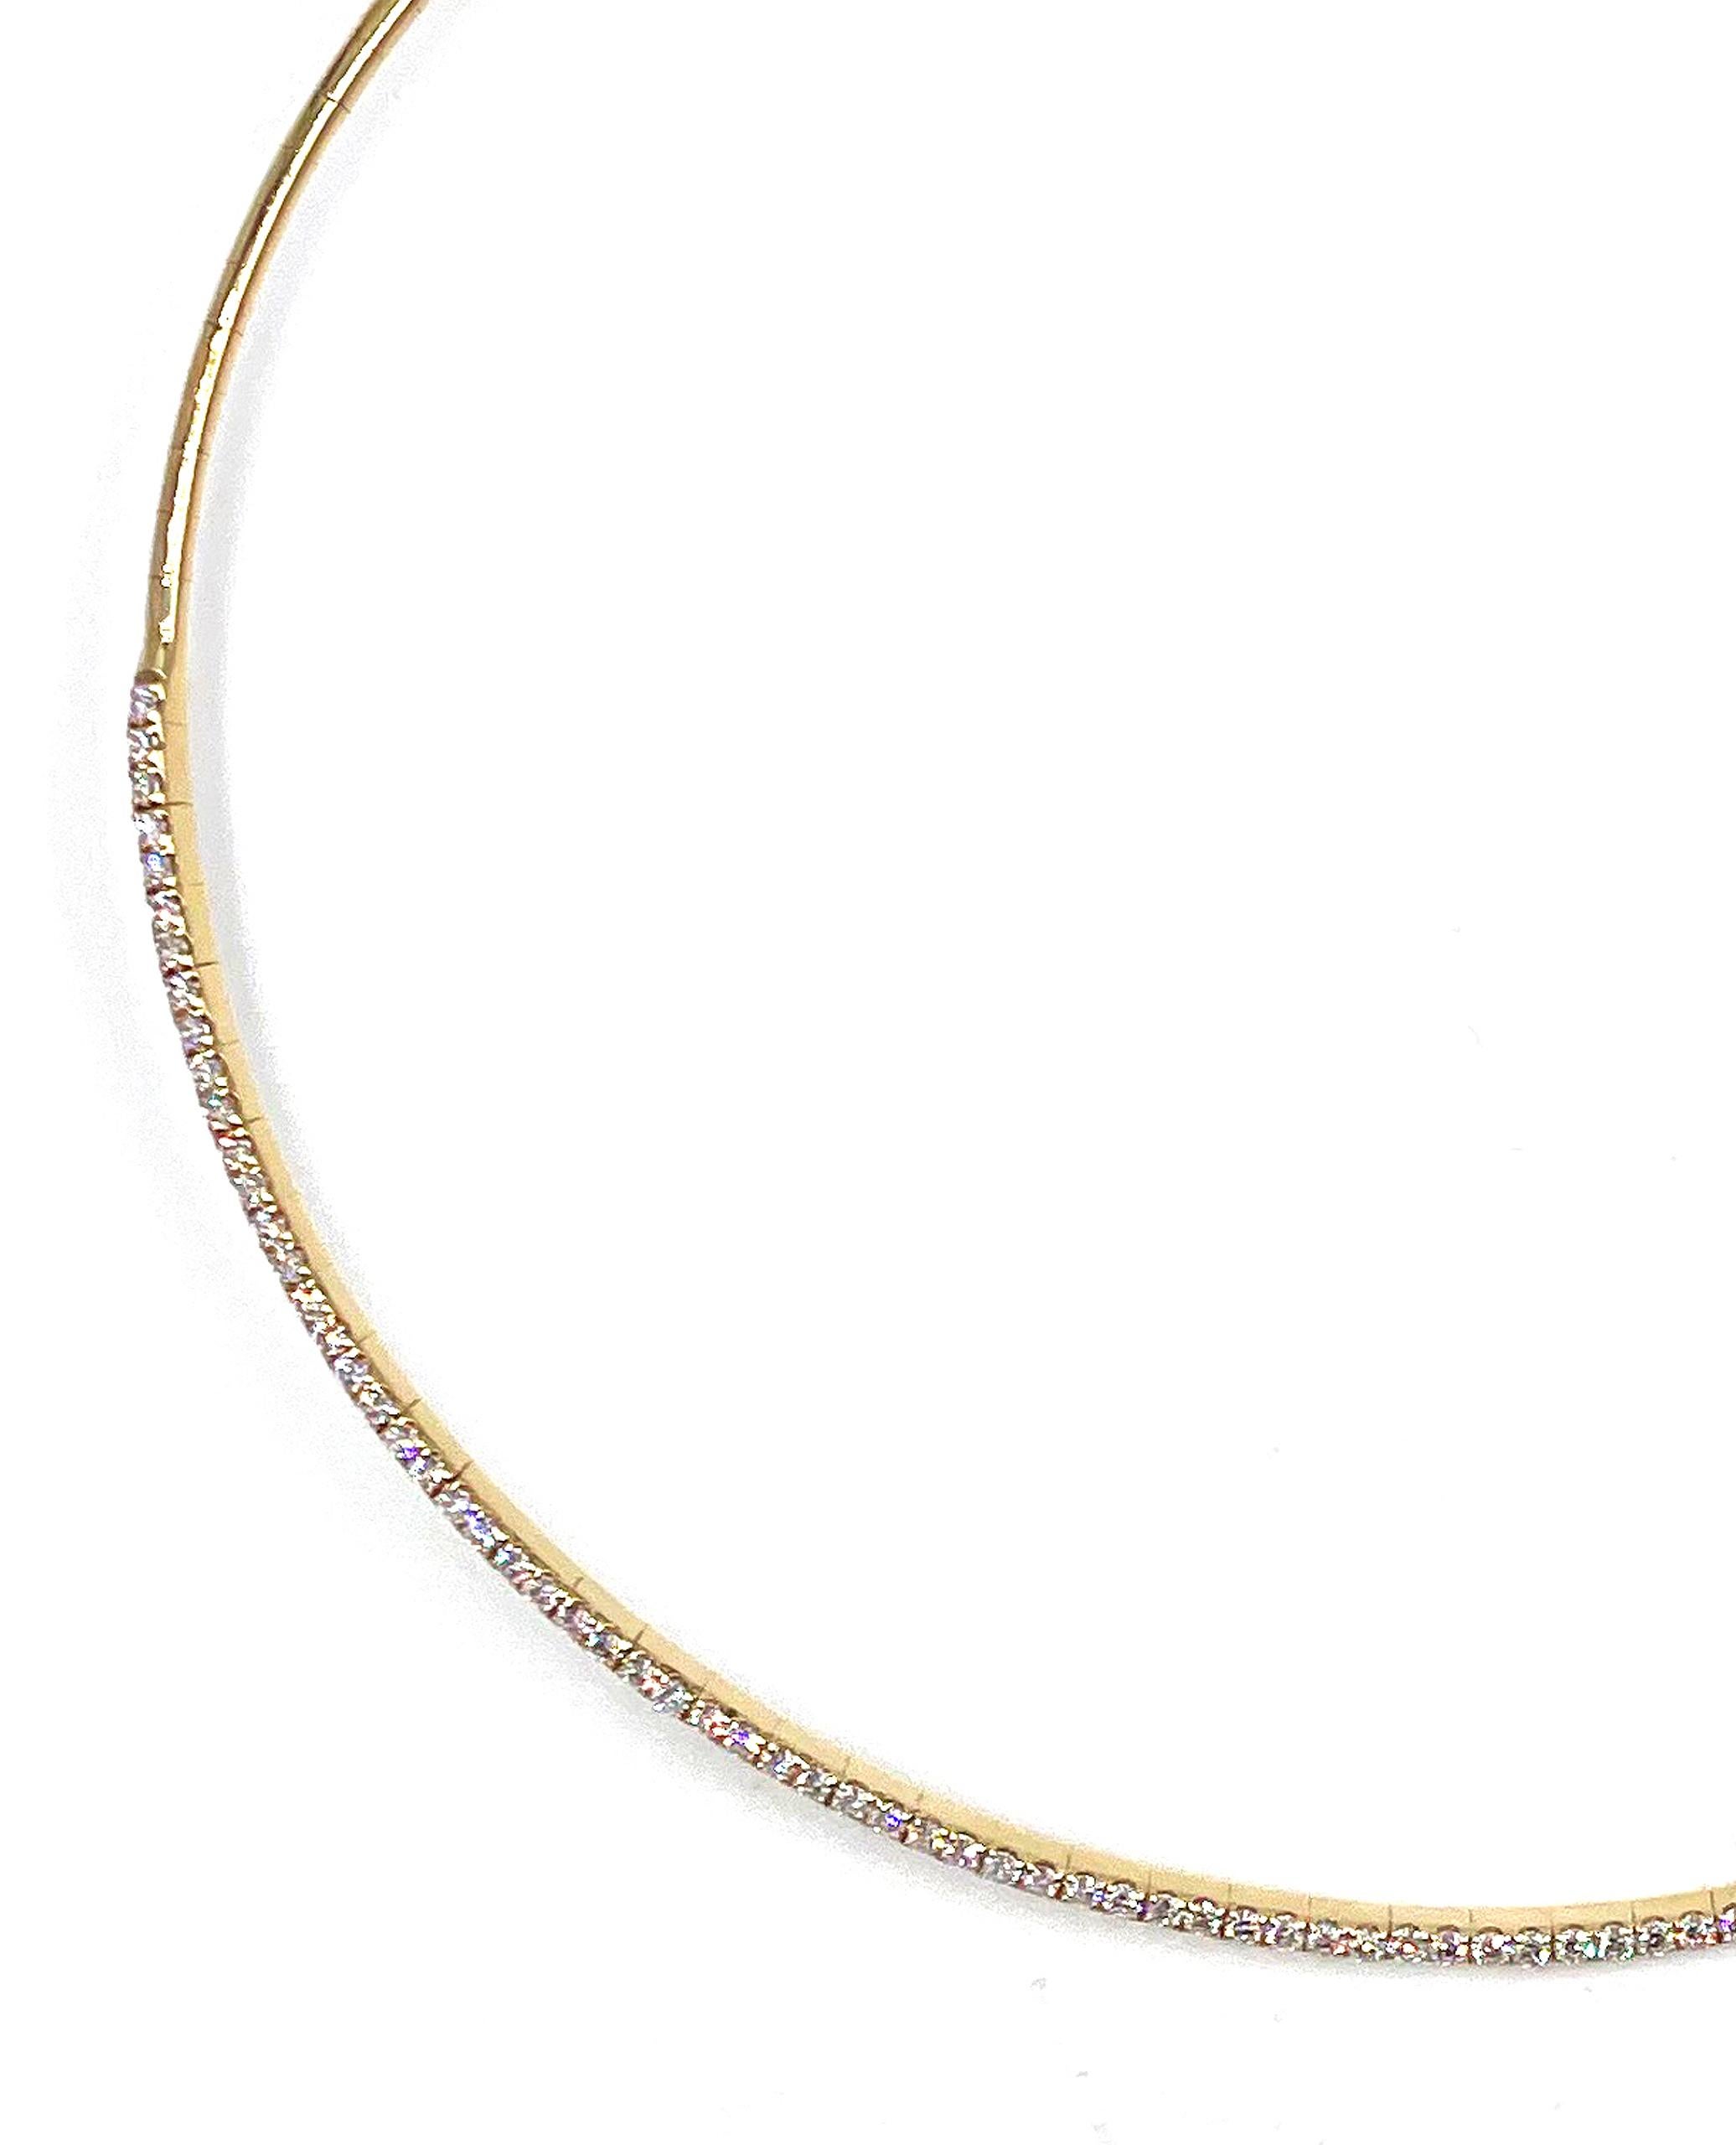 Simple, clean and timeless. This 18K yellow gold collar necklace is set with round brilliant-cut diamonds weighing a total of 2.36 carats.  Can be worn alone or layered with another piece.

* Diamonds are G color, VS clarity.
* Can be adjusted